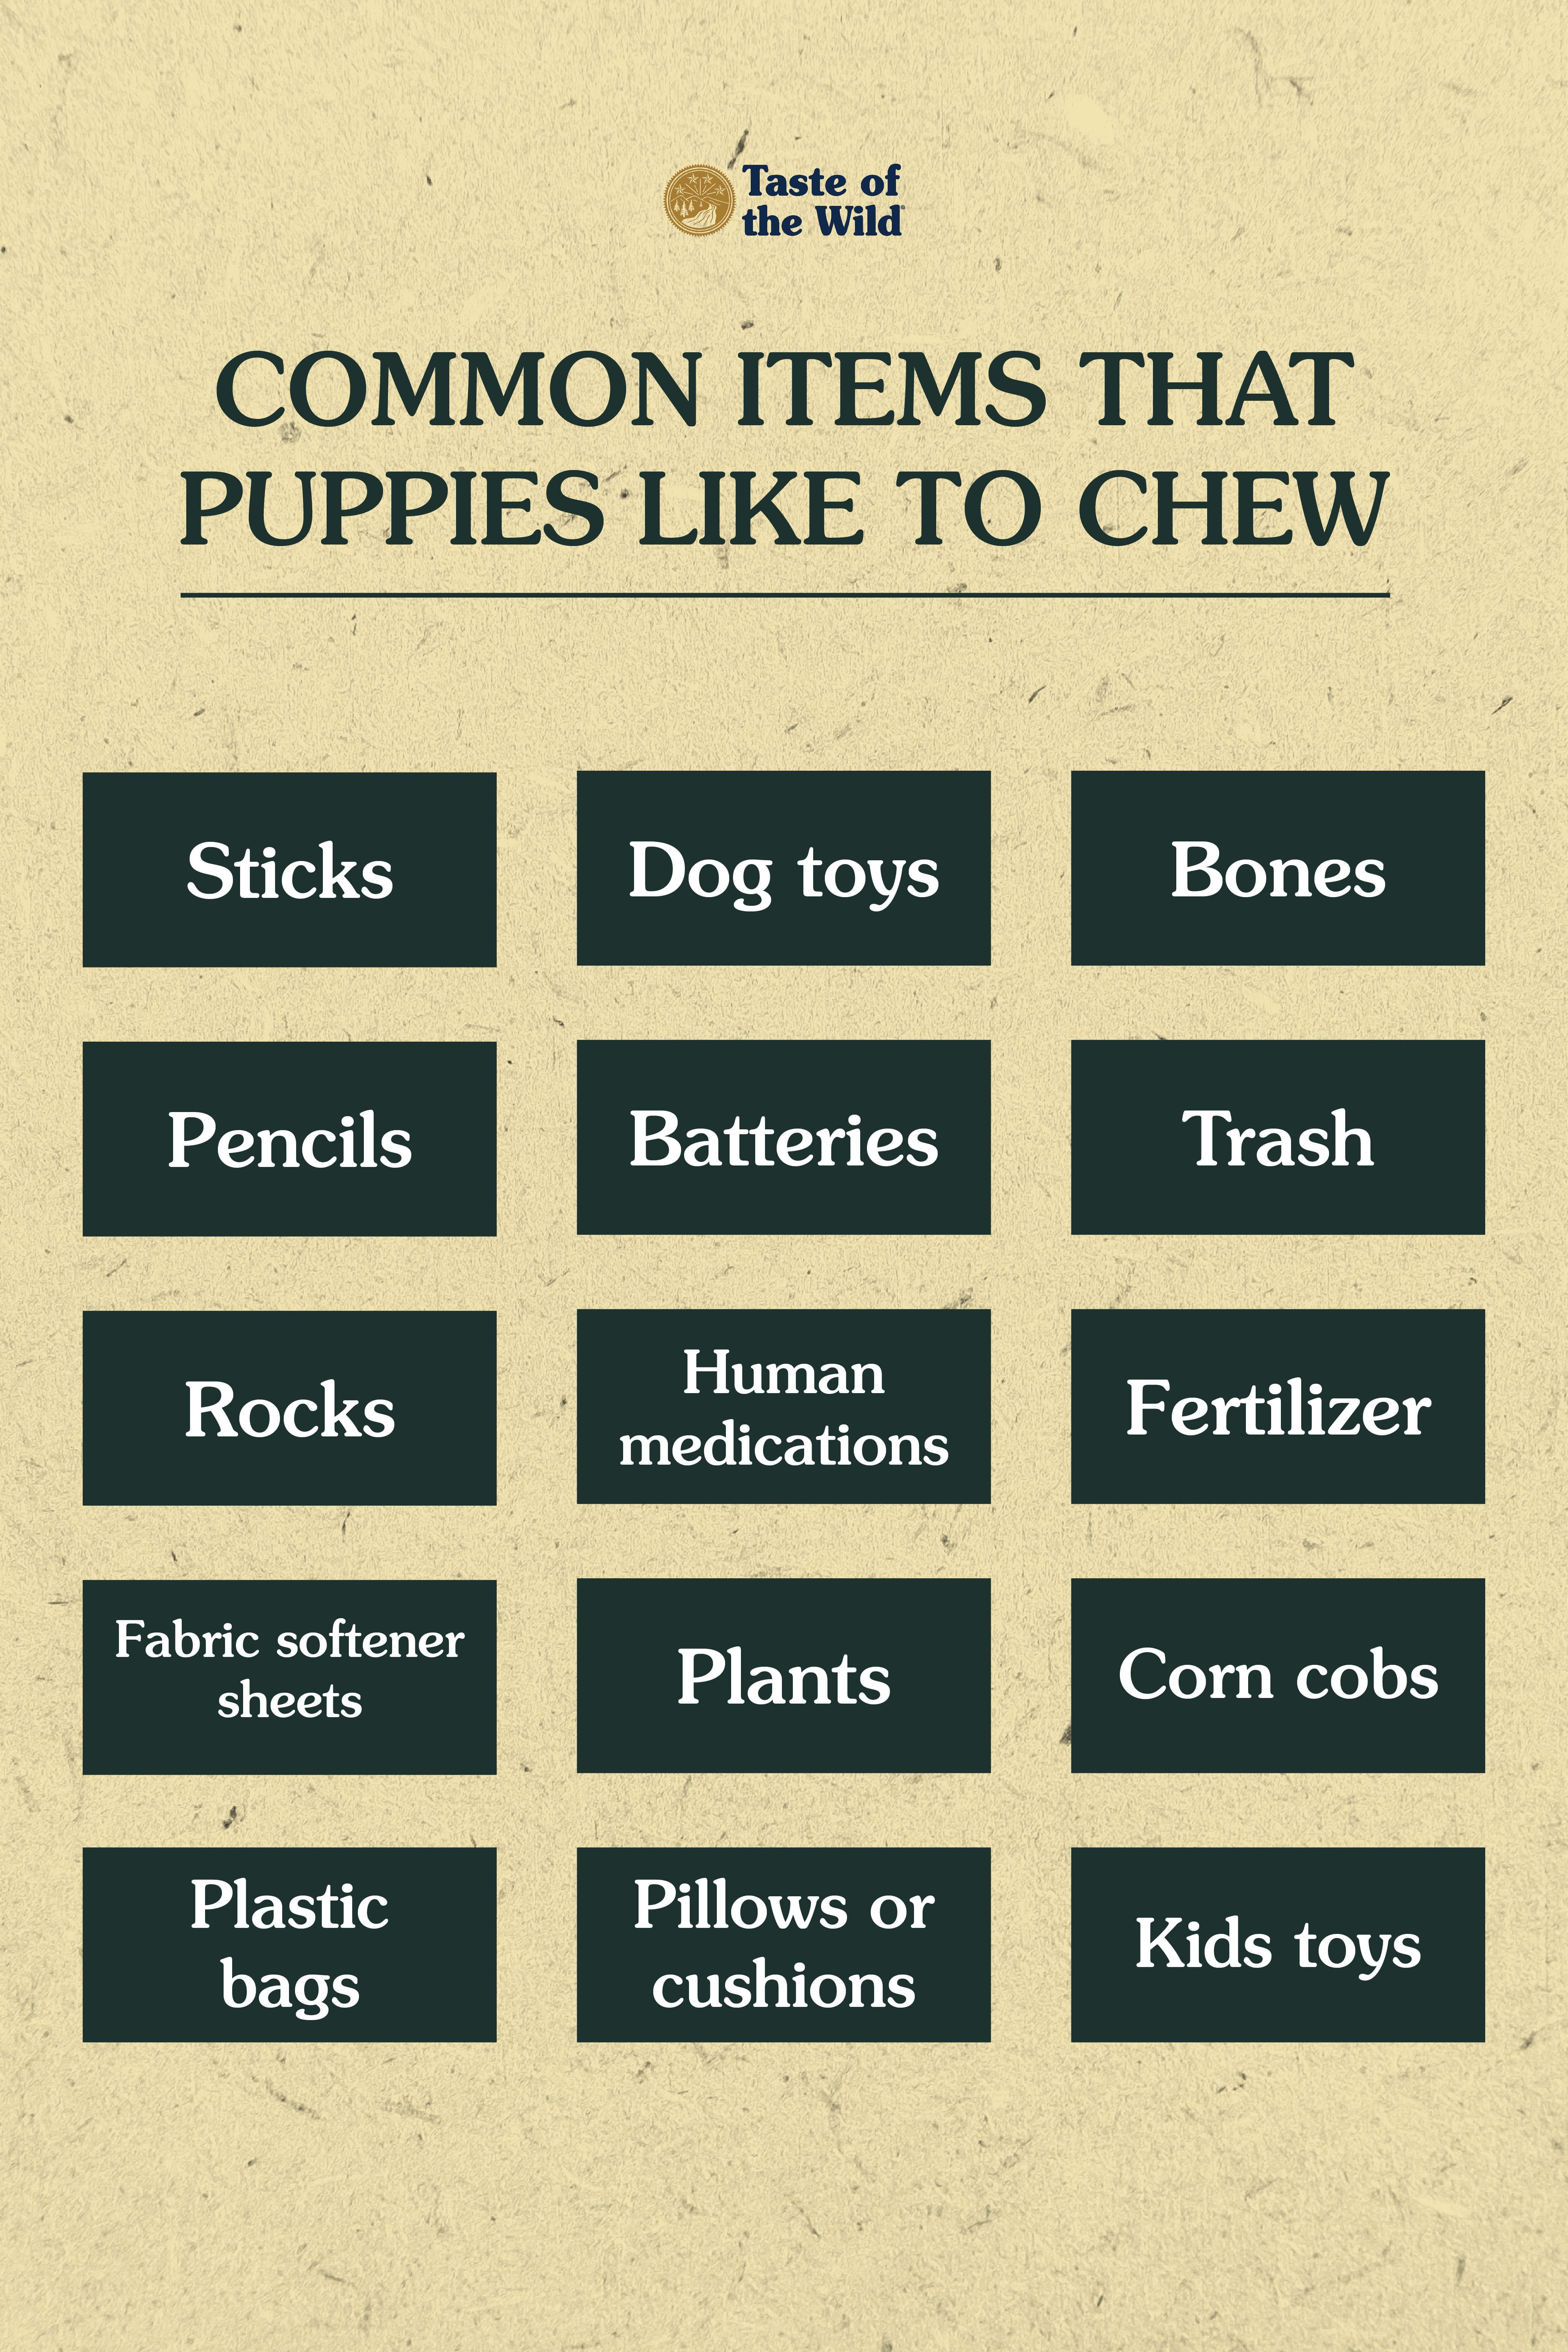 Common items that puppies like to chew. | Taste of the Wild